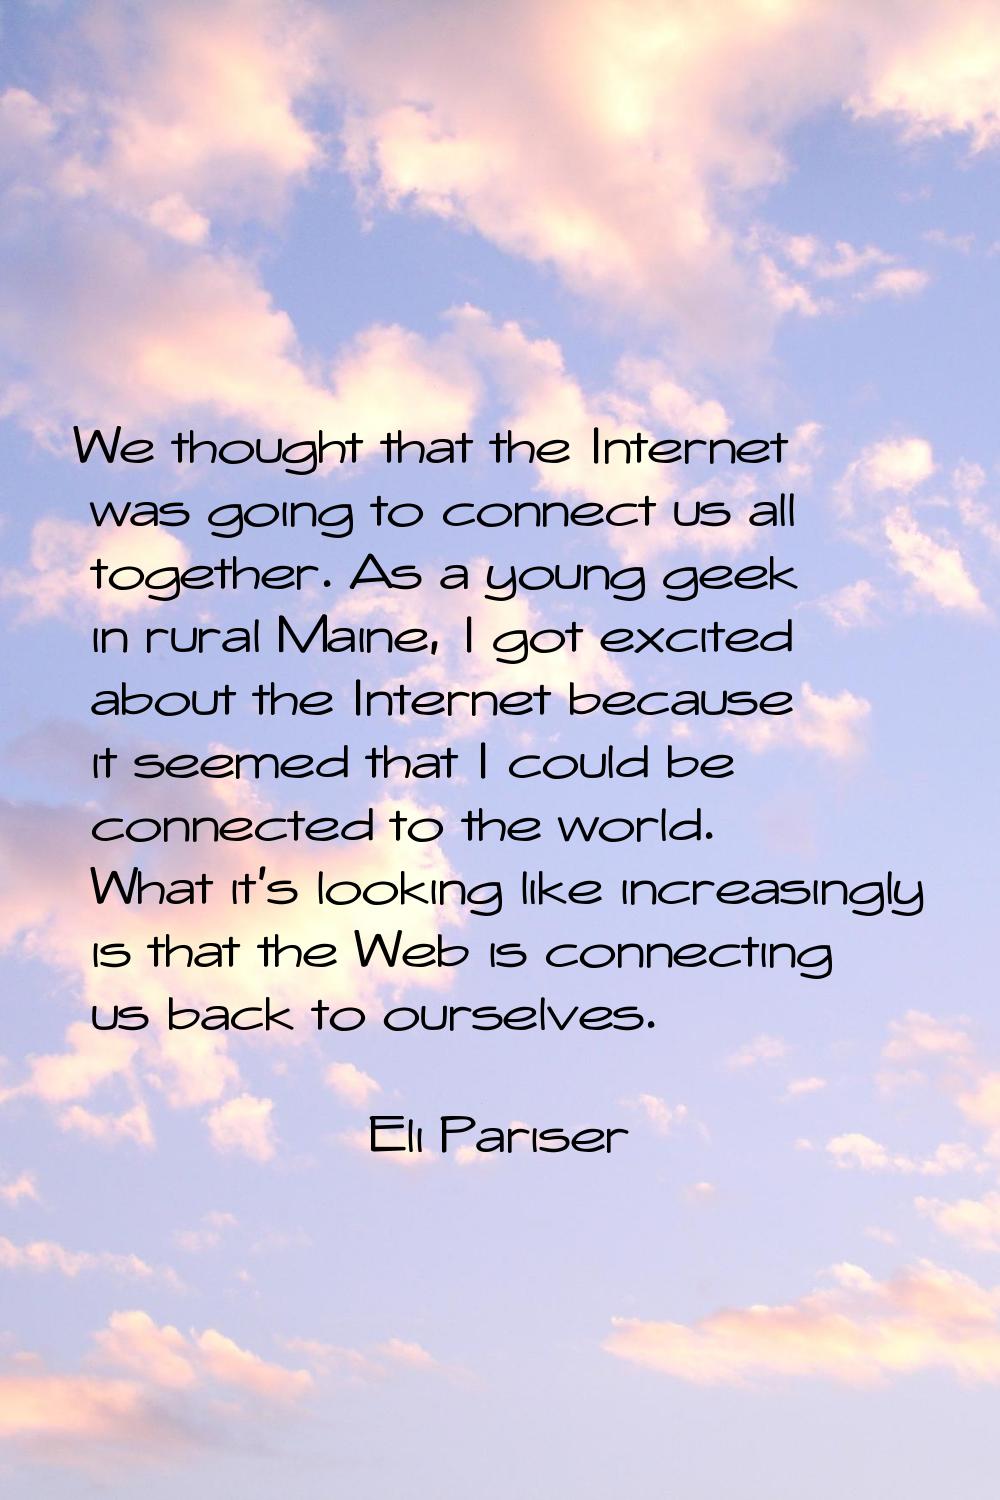 We thought that the Internet was going to connect us all together. As a young geek in rural Maine, 